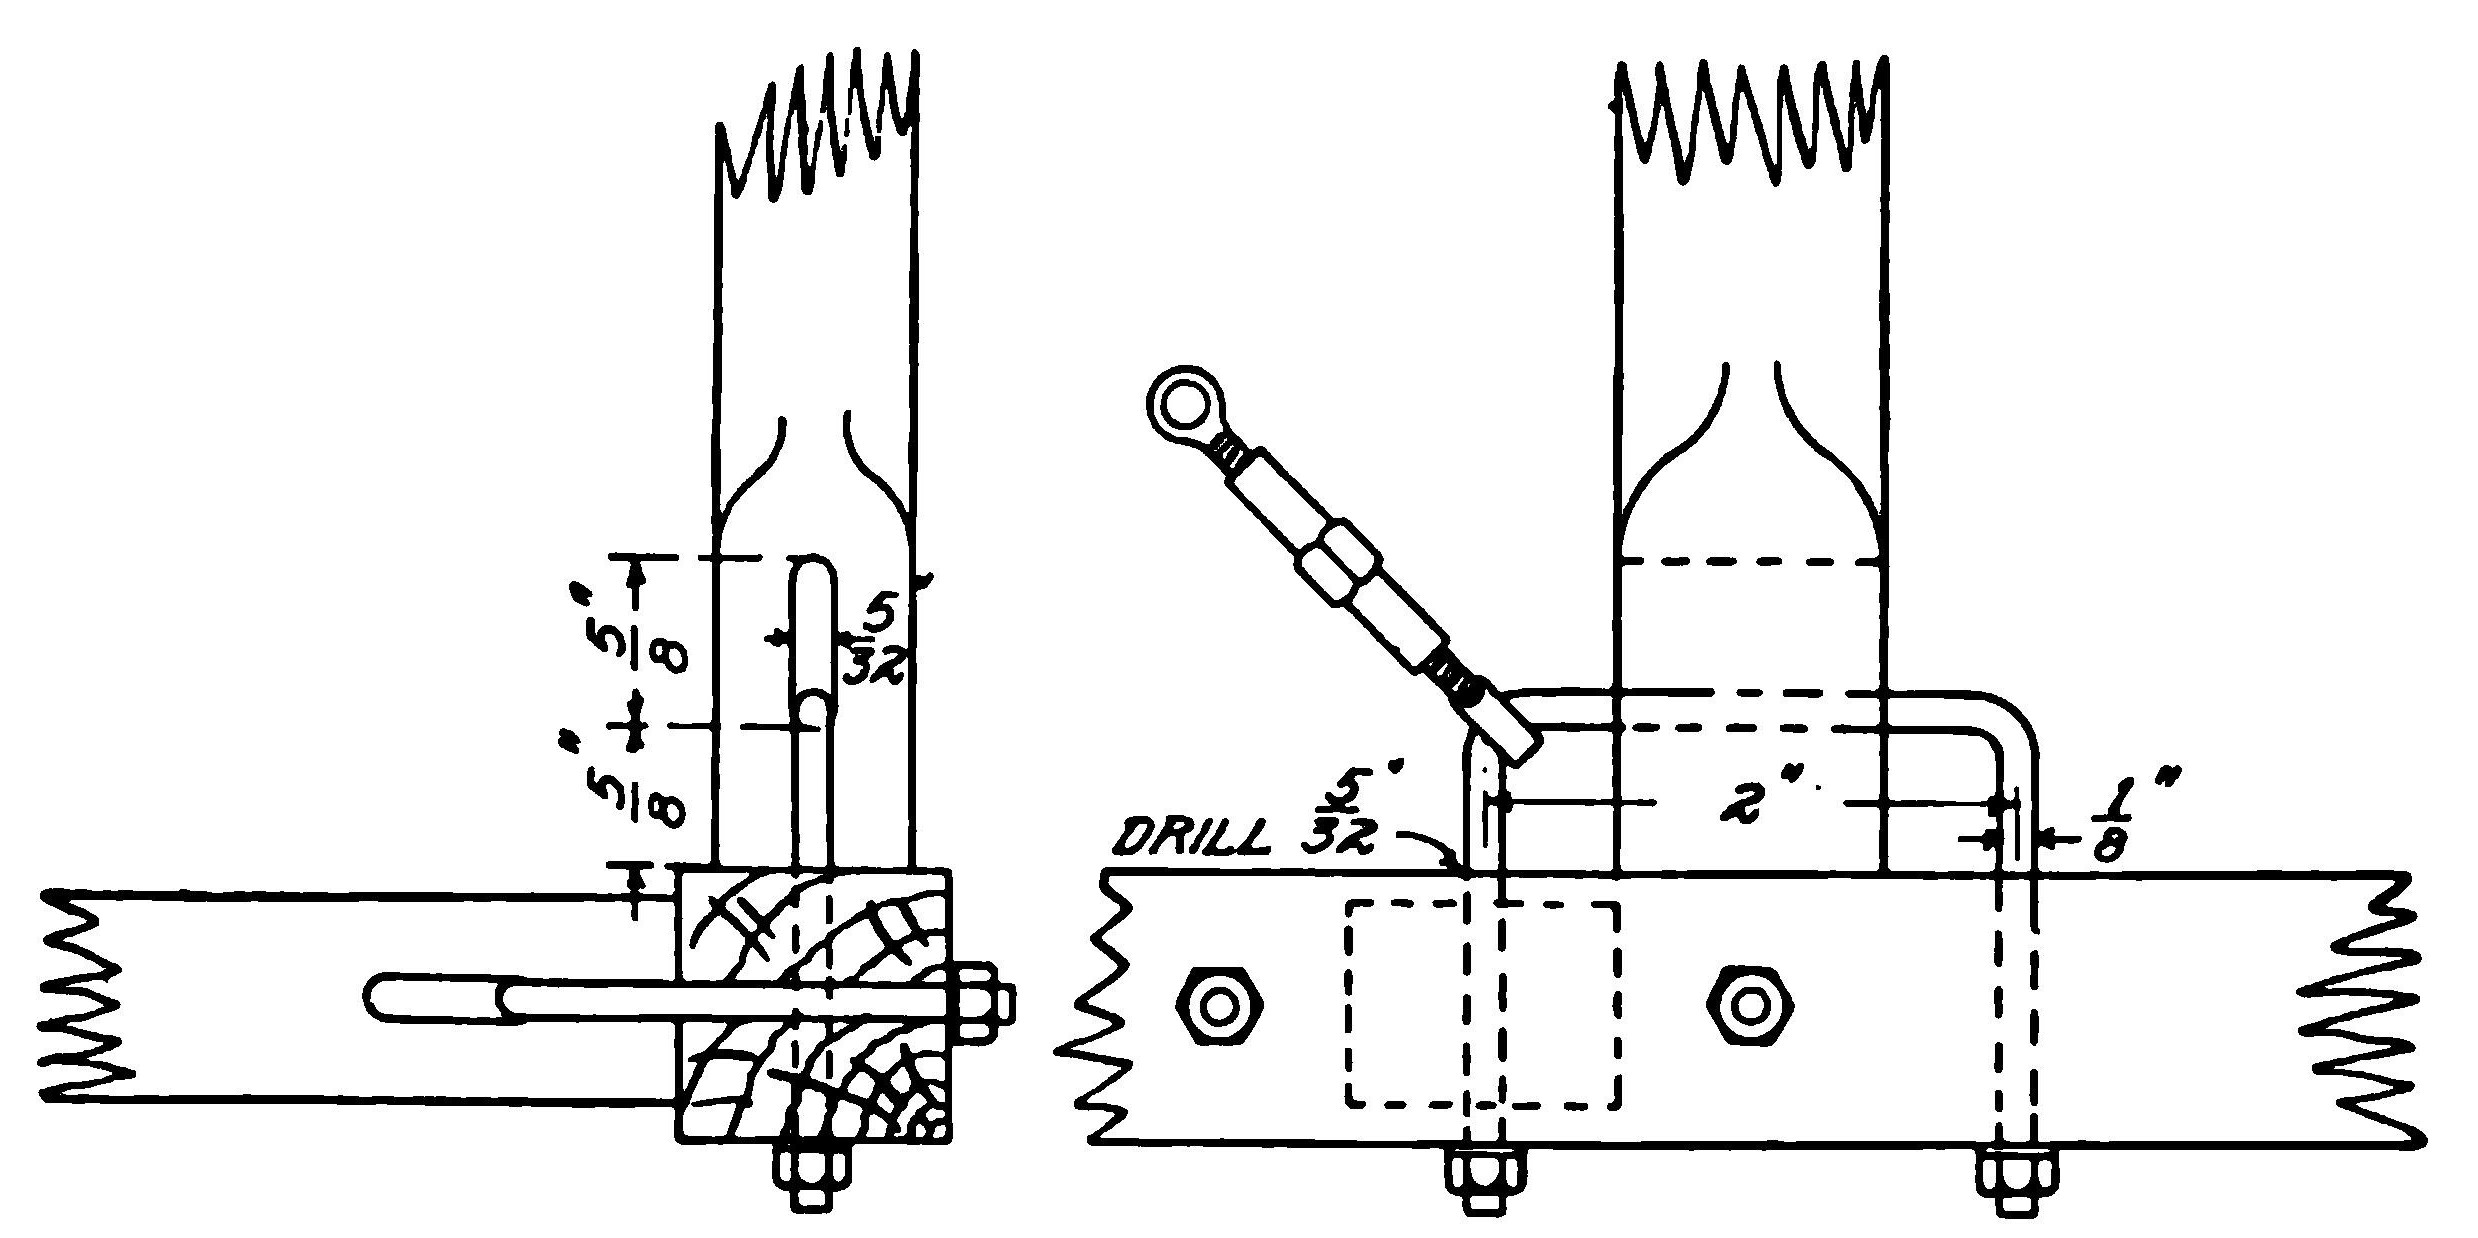 Fig. 26. Details of U-bolt Which is a Feature of Bleriot Construction